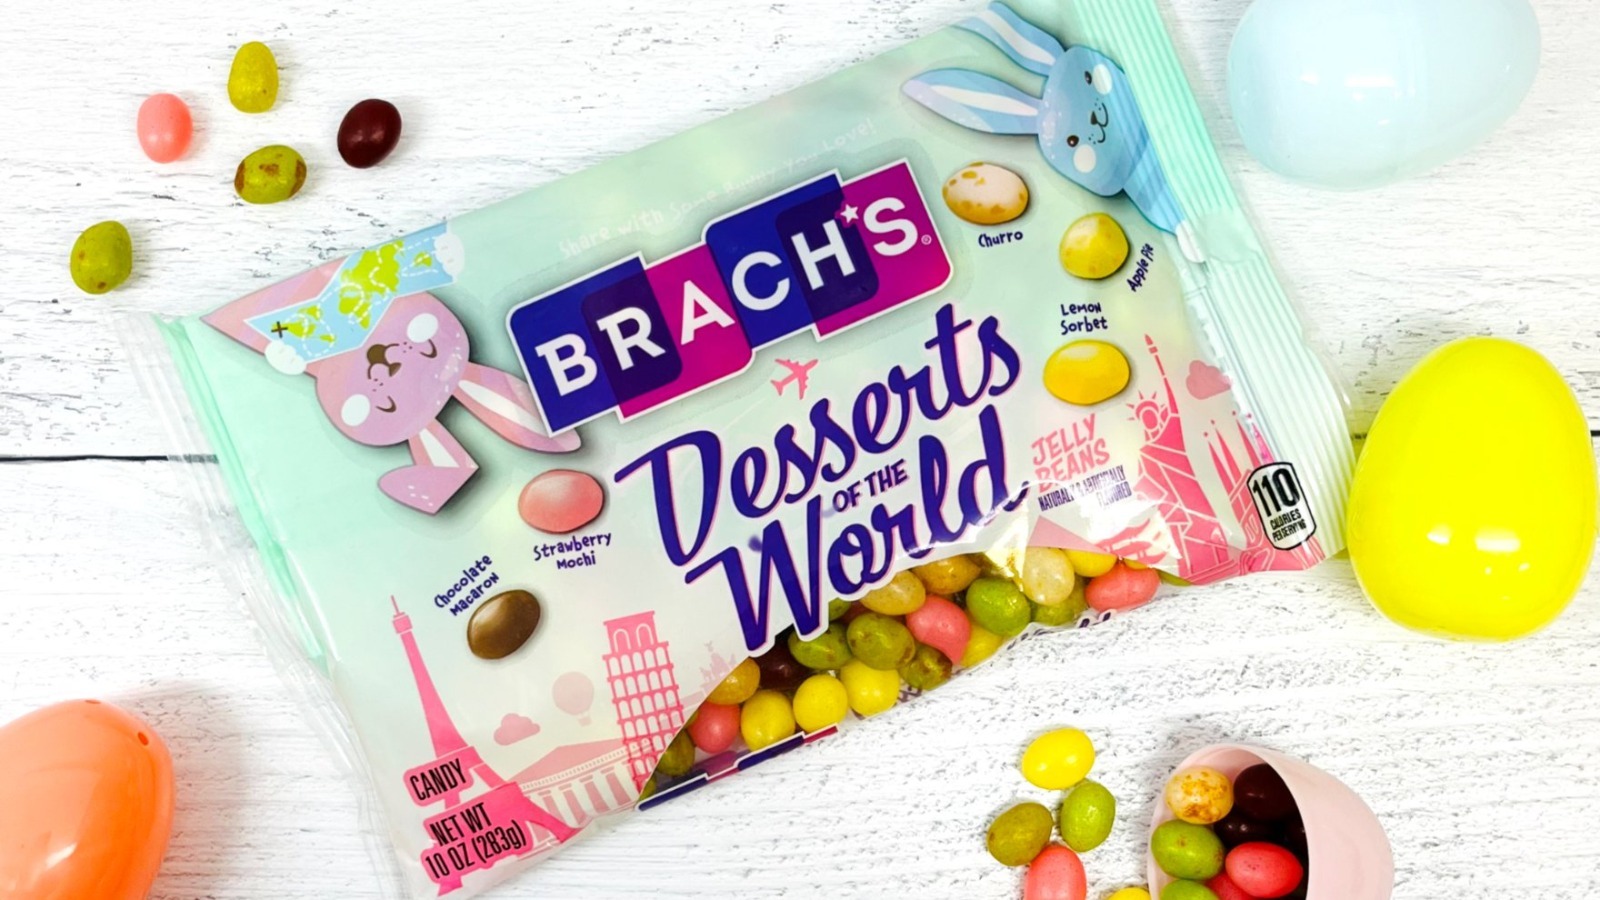 The Sweet History of Brach's Candy